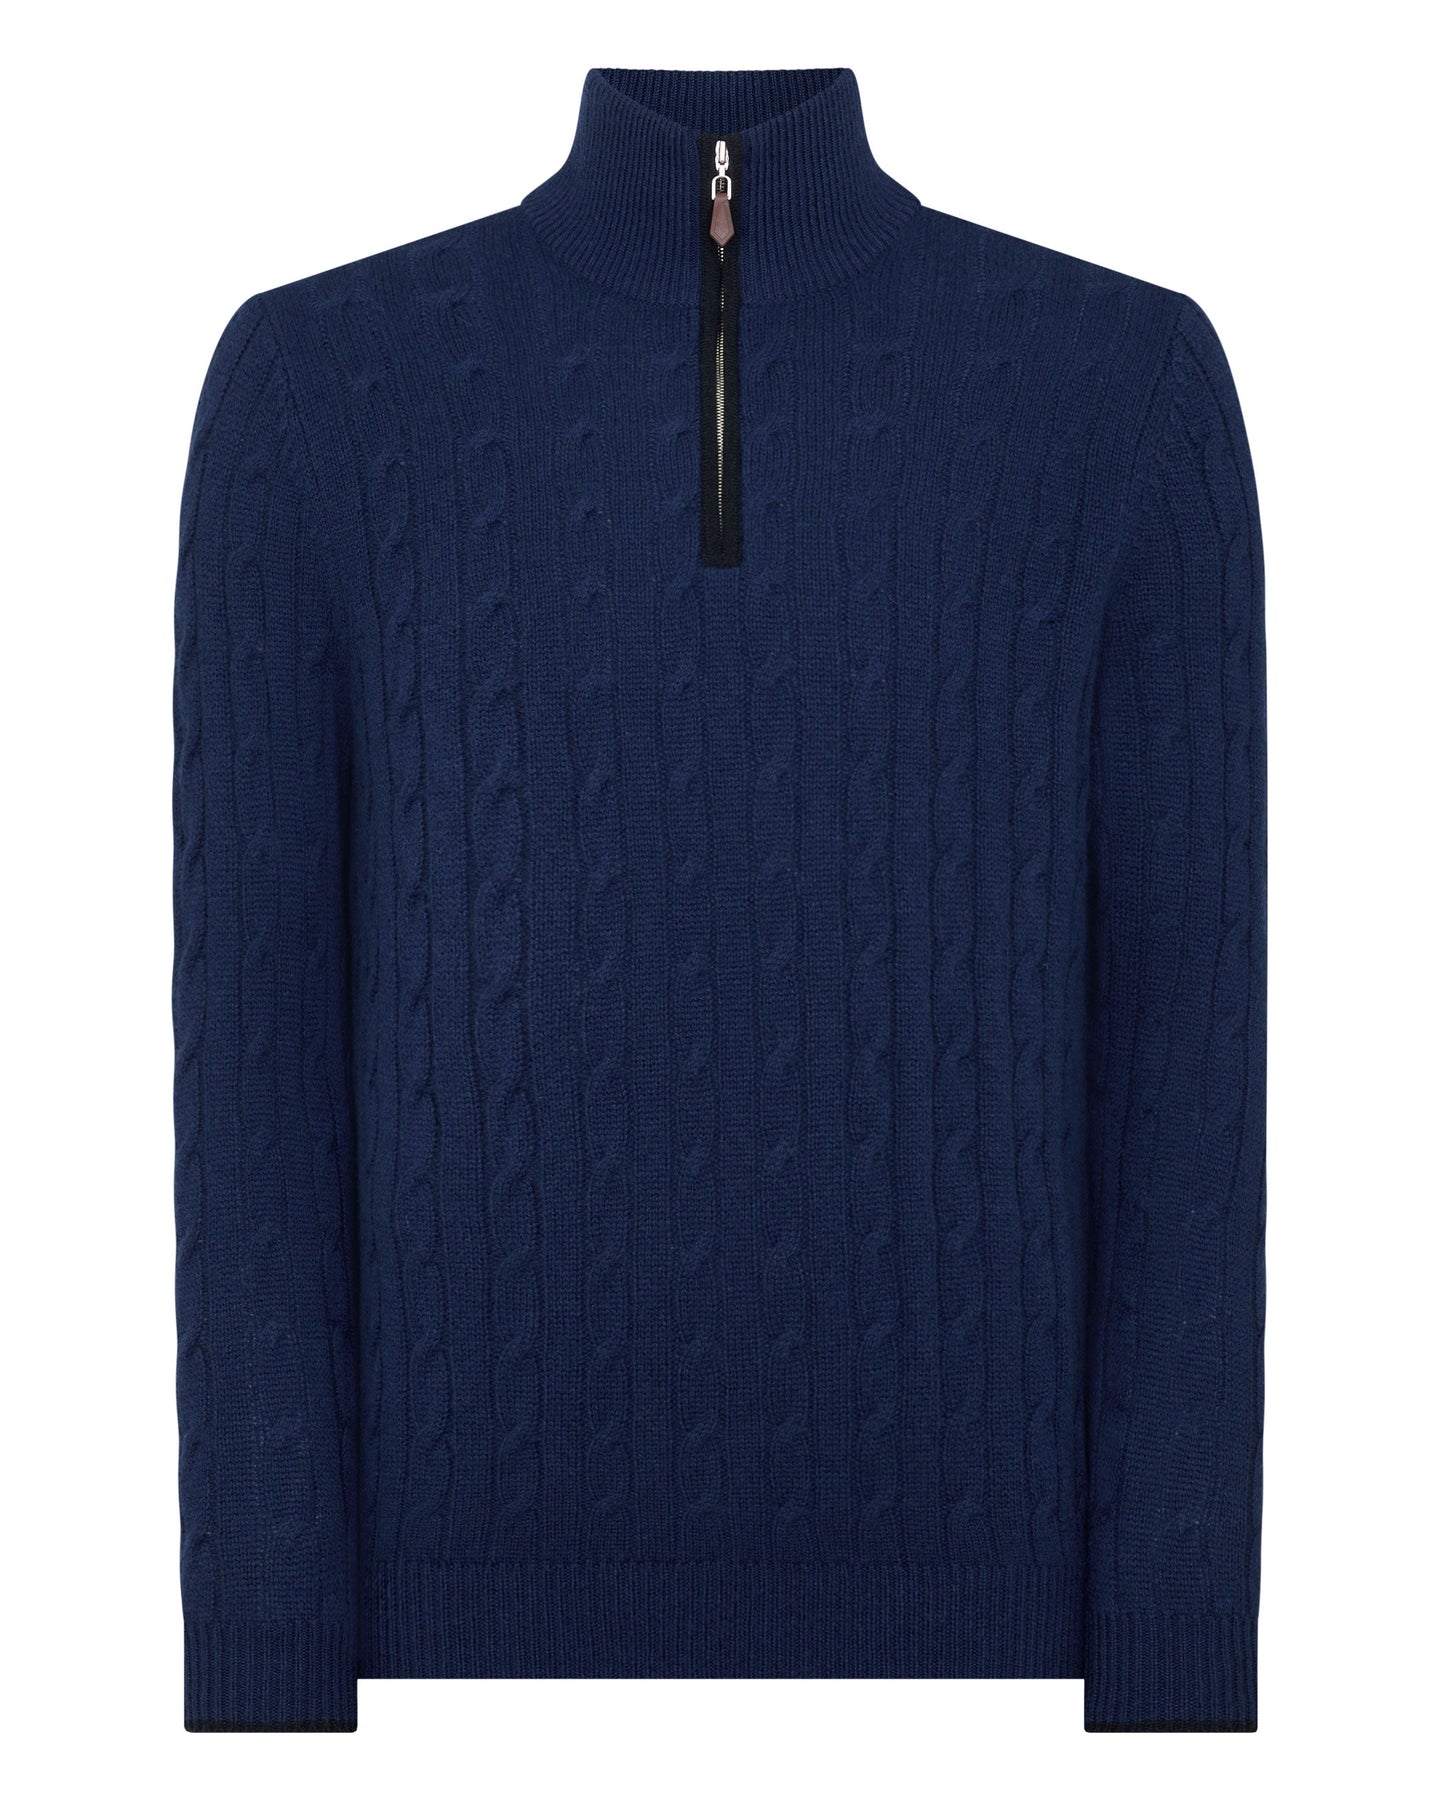 N.Peal Men's Cable Half Zip Cashmere Jumper French Blue